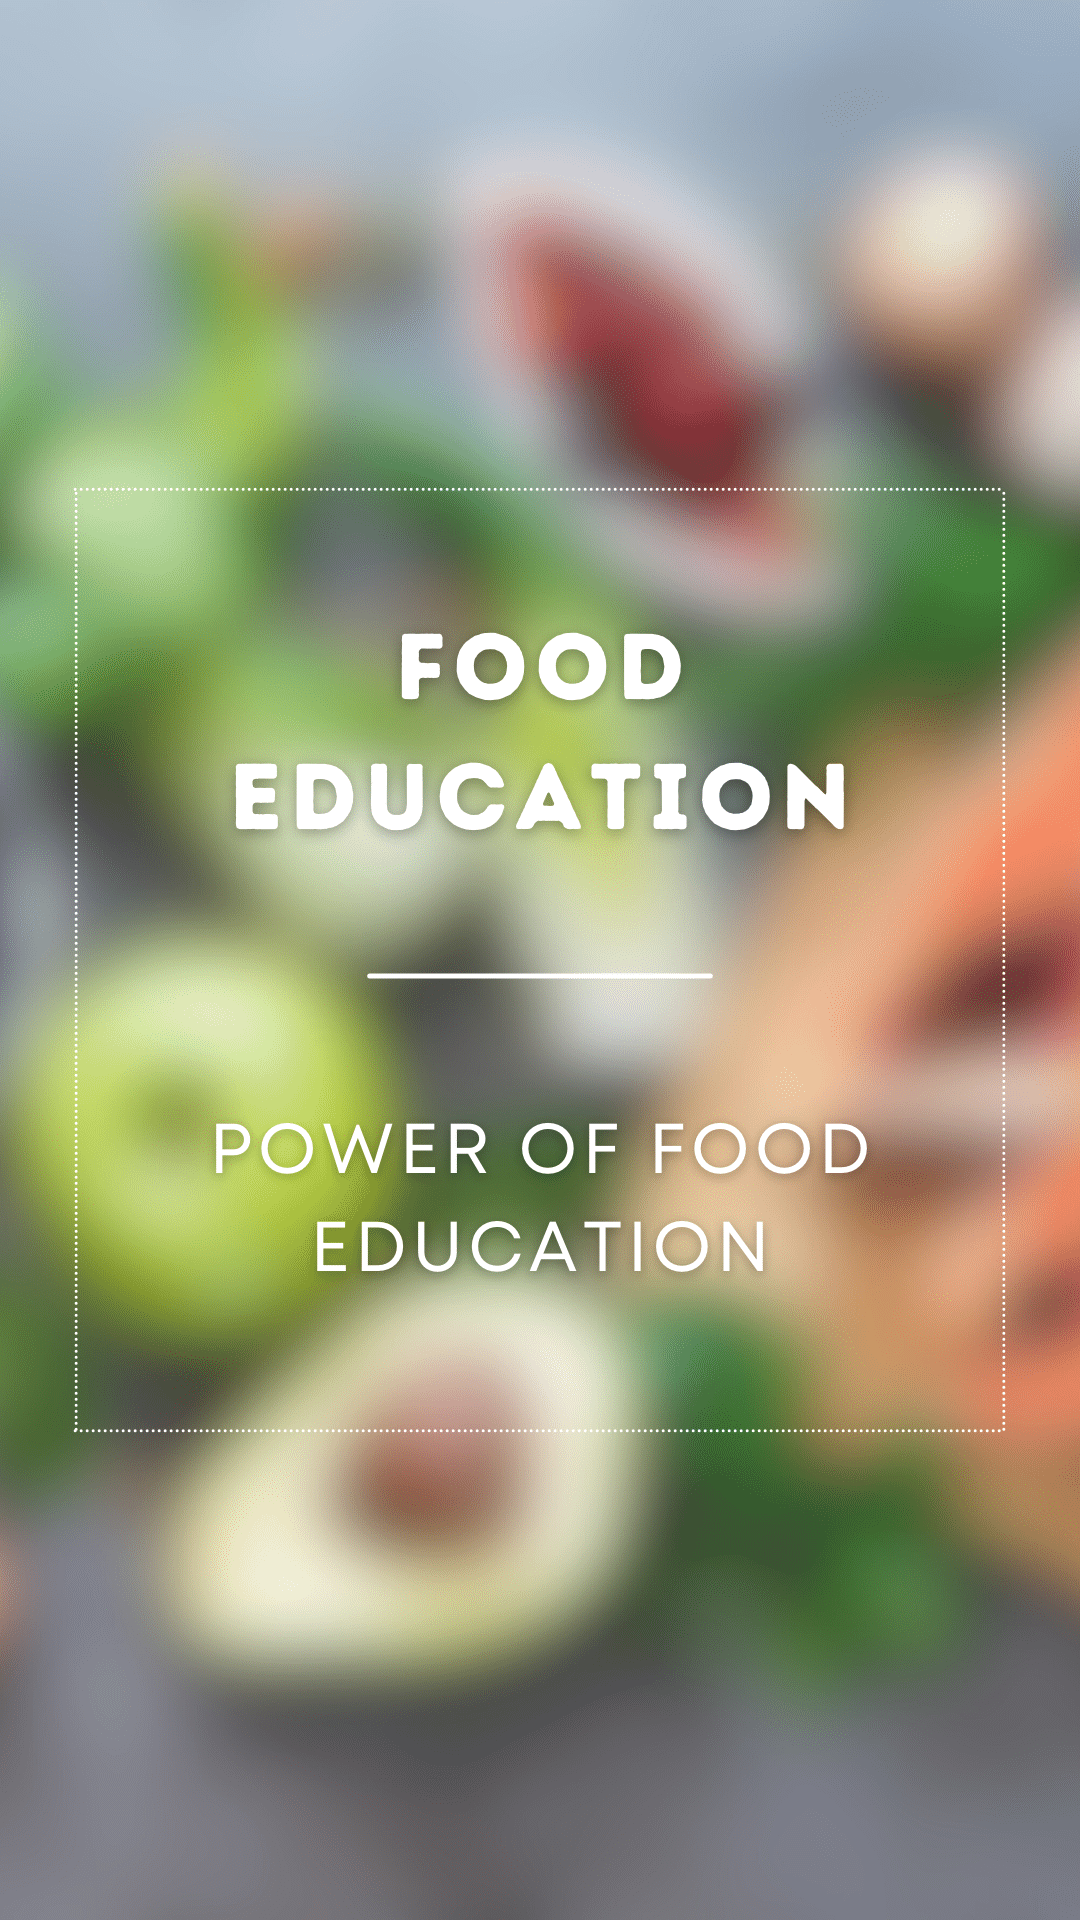 Power of Food Education